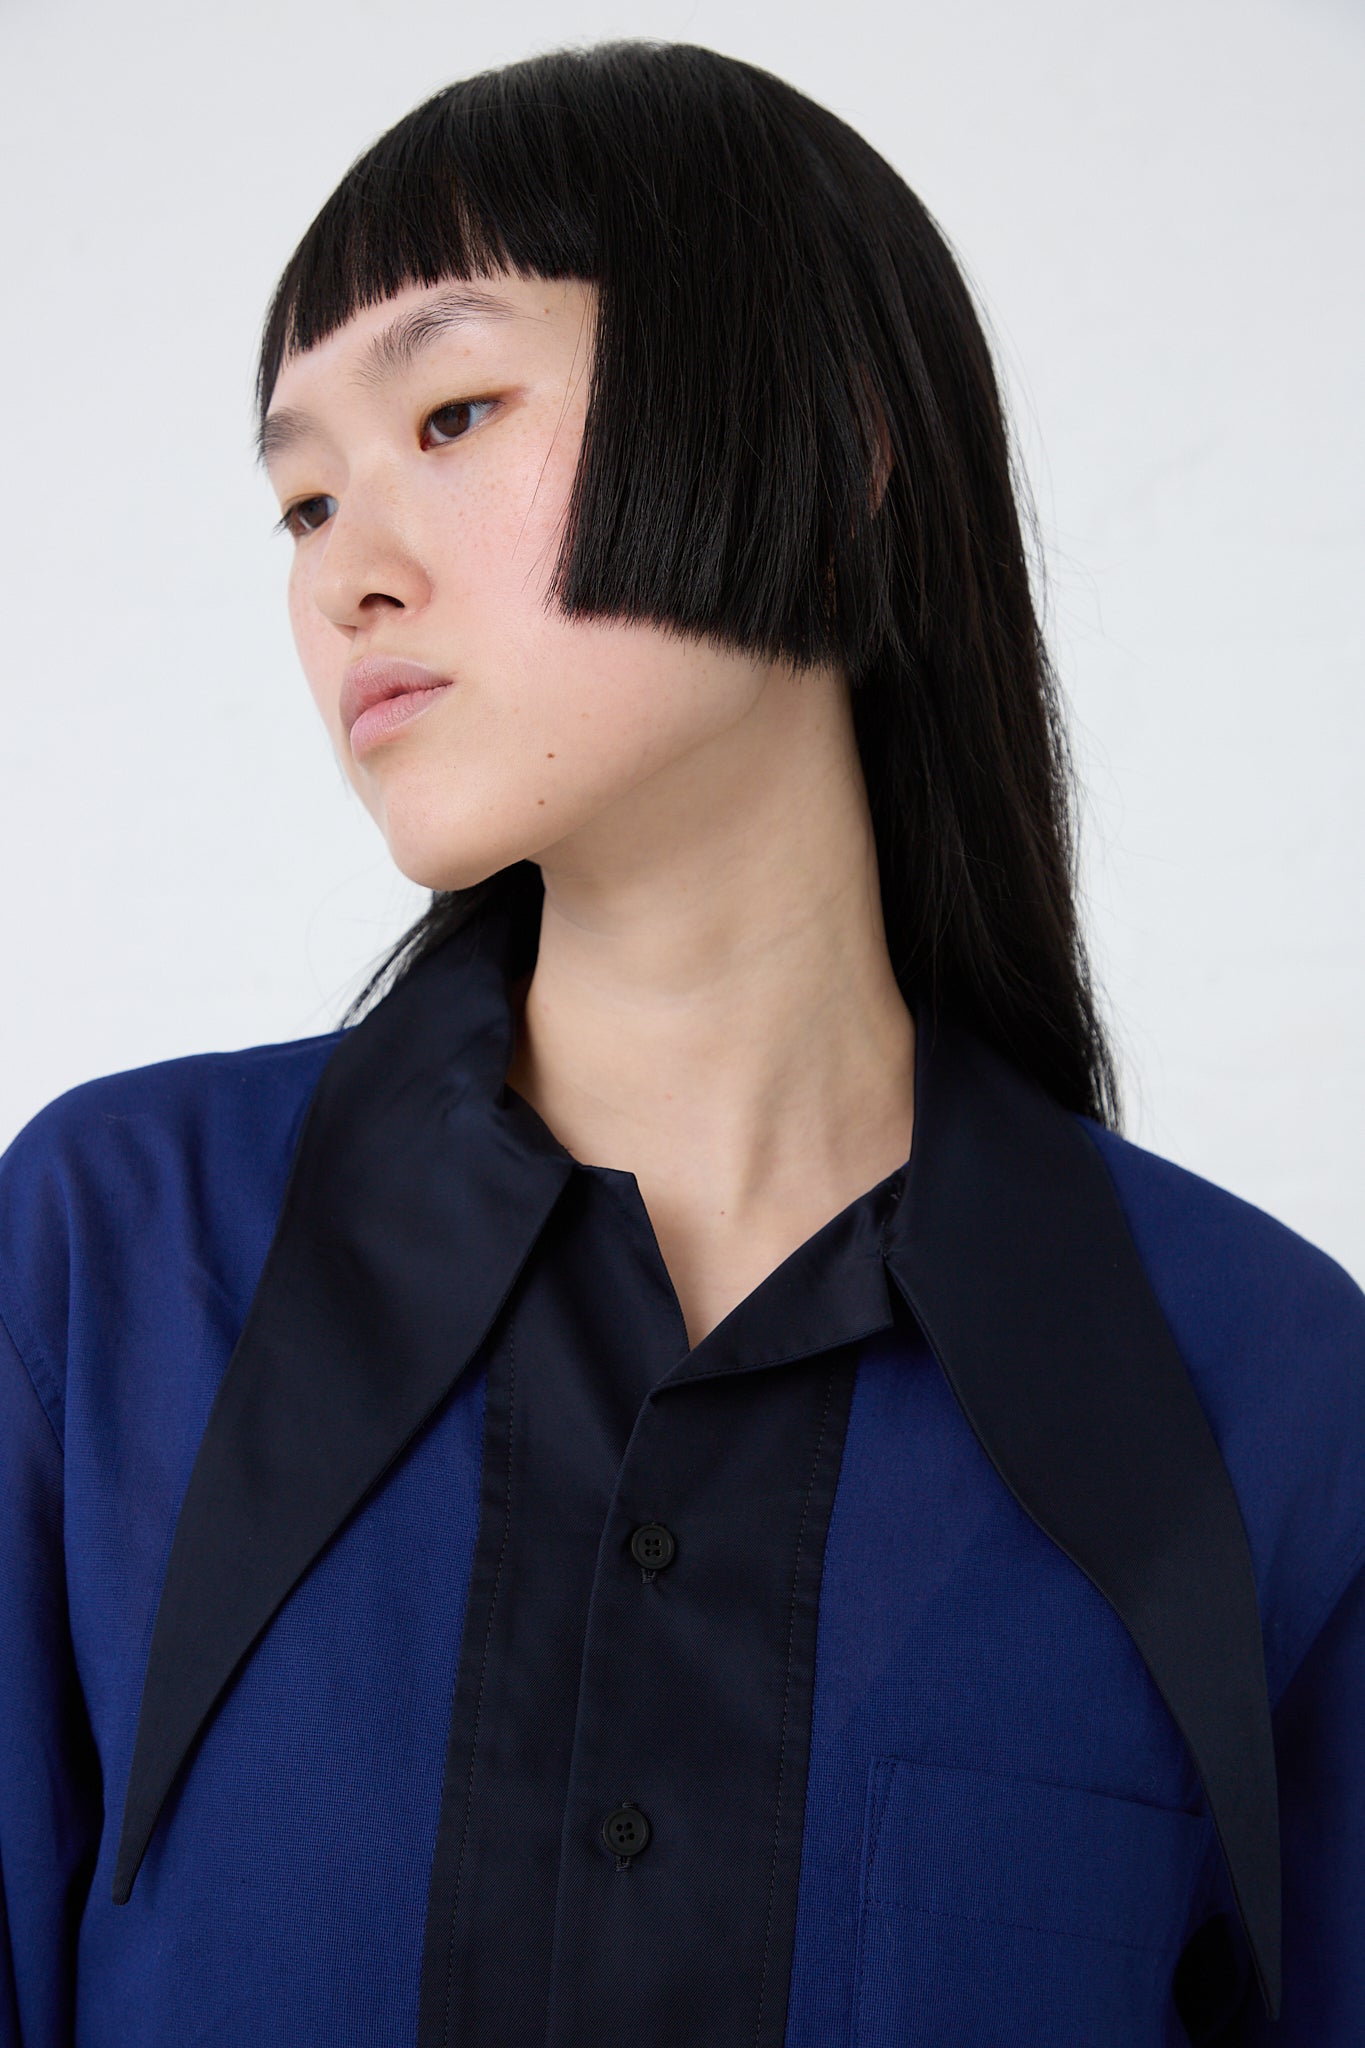 A young Asian woman with a blunt bob haircut, wearing a TOGA ARCHIVES Mesh Lace Shirt in Blue with a black collar, gazes to the side against a white background.